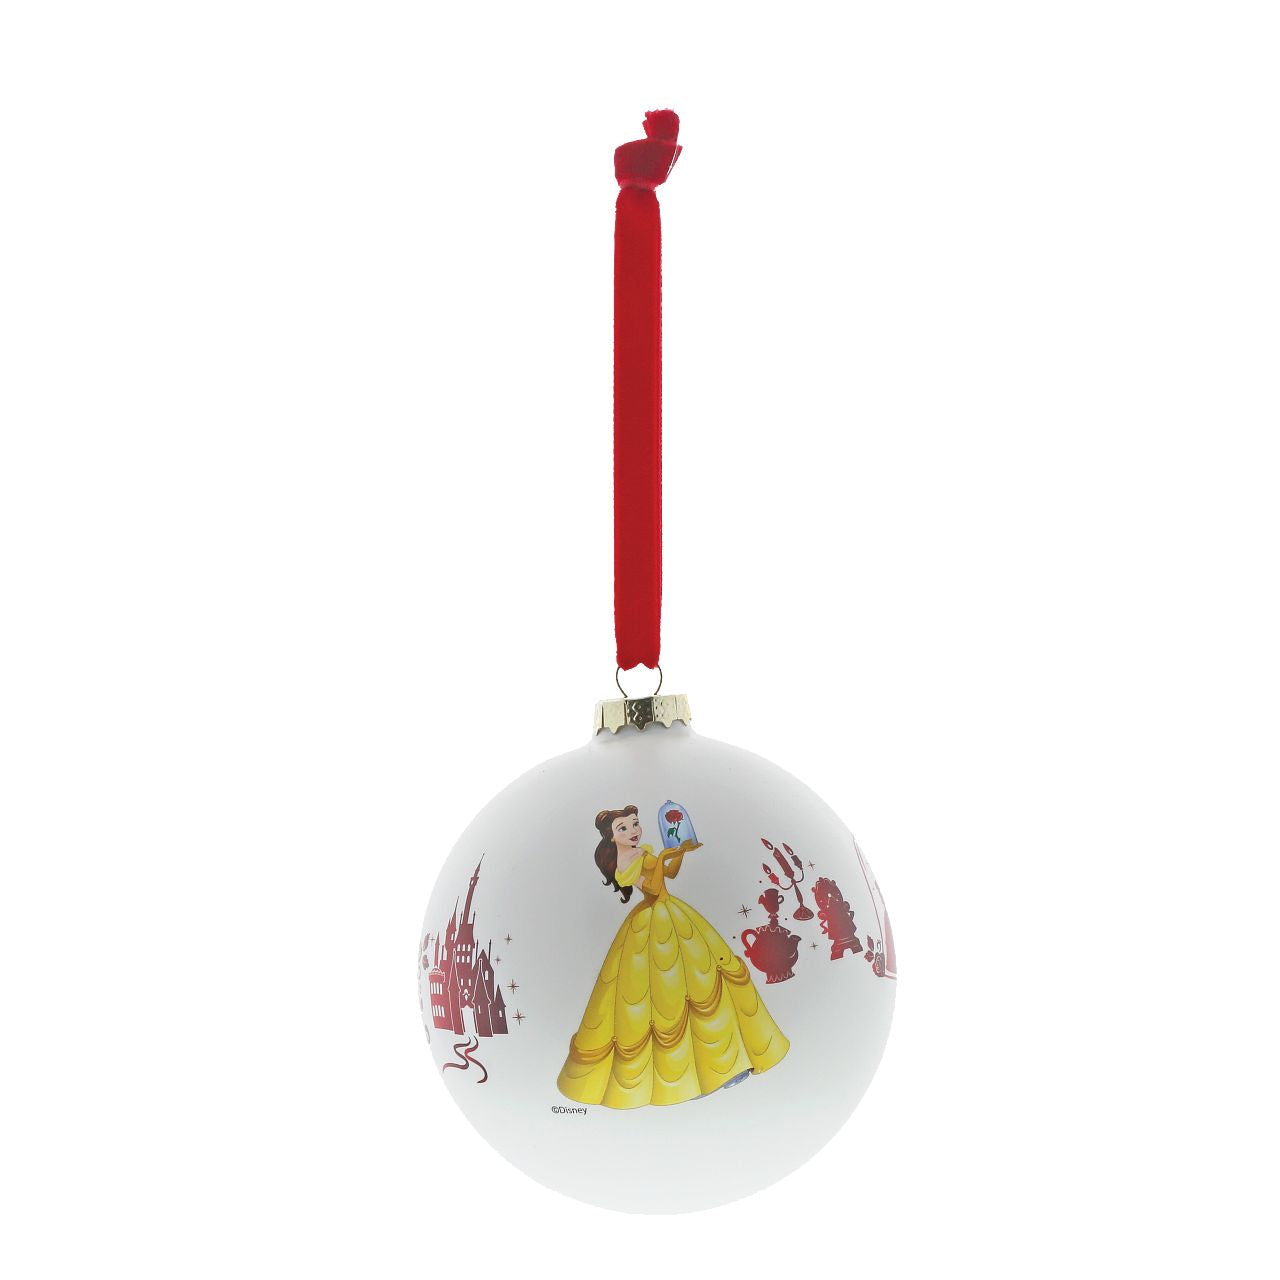 Disney Christmas Bauble Beauty and the Beast Be Our Guest  Belle stands out in her yellow dress against the red iconic Beauty and the Beast silhouettes in this beautiful glass bauble. This treasured keepsake would make a lovely unique gift for a friend, or a self-purchase to brighten up the home.